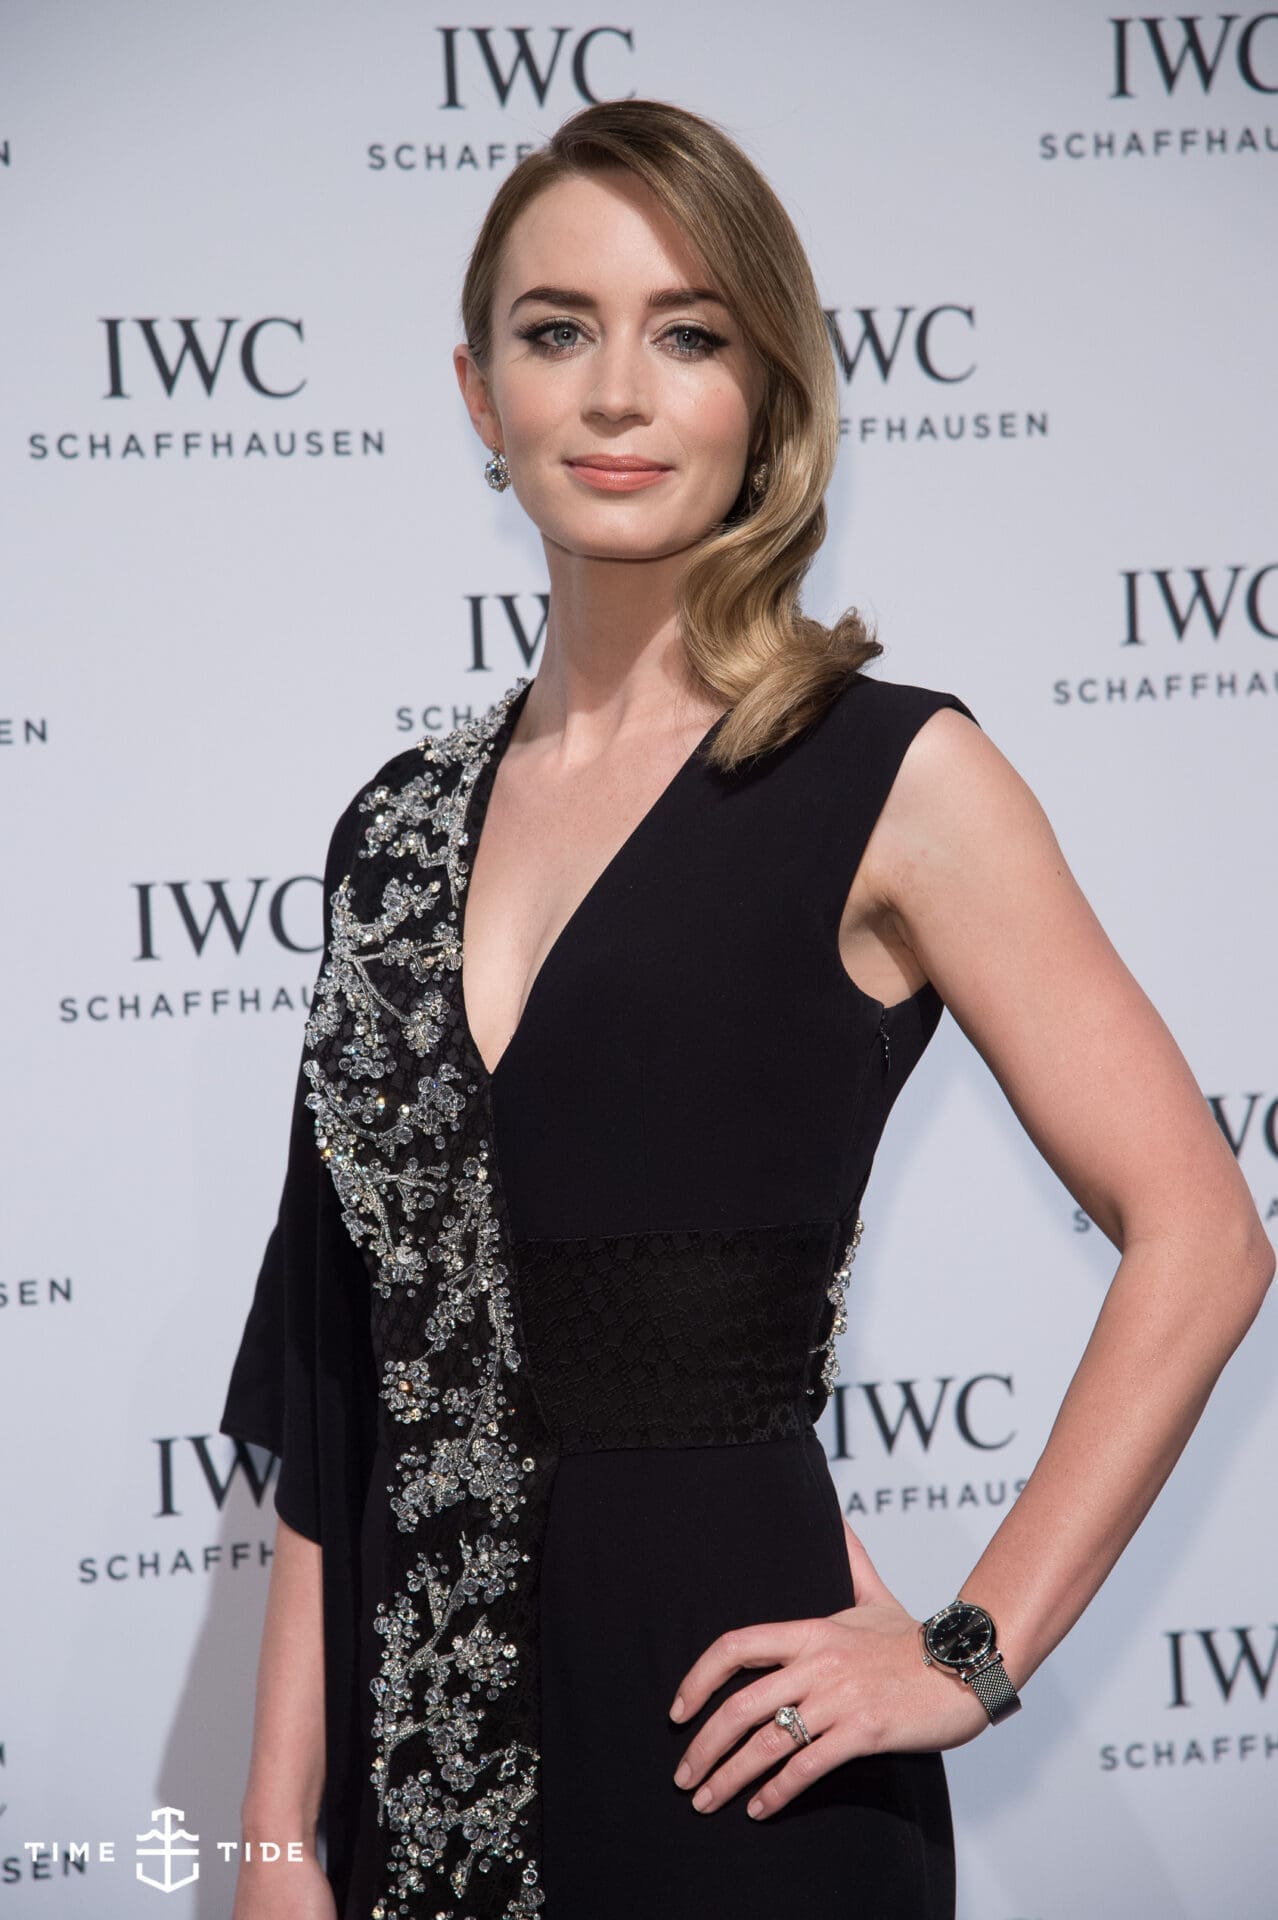 SIHH Behind the Scenes: Day 2, Overheard at the IWC Party